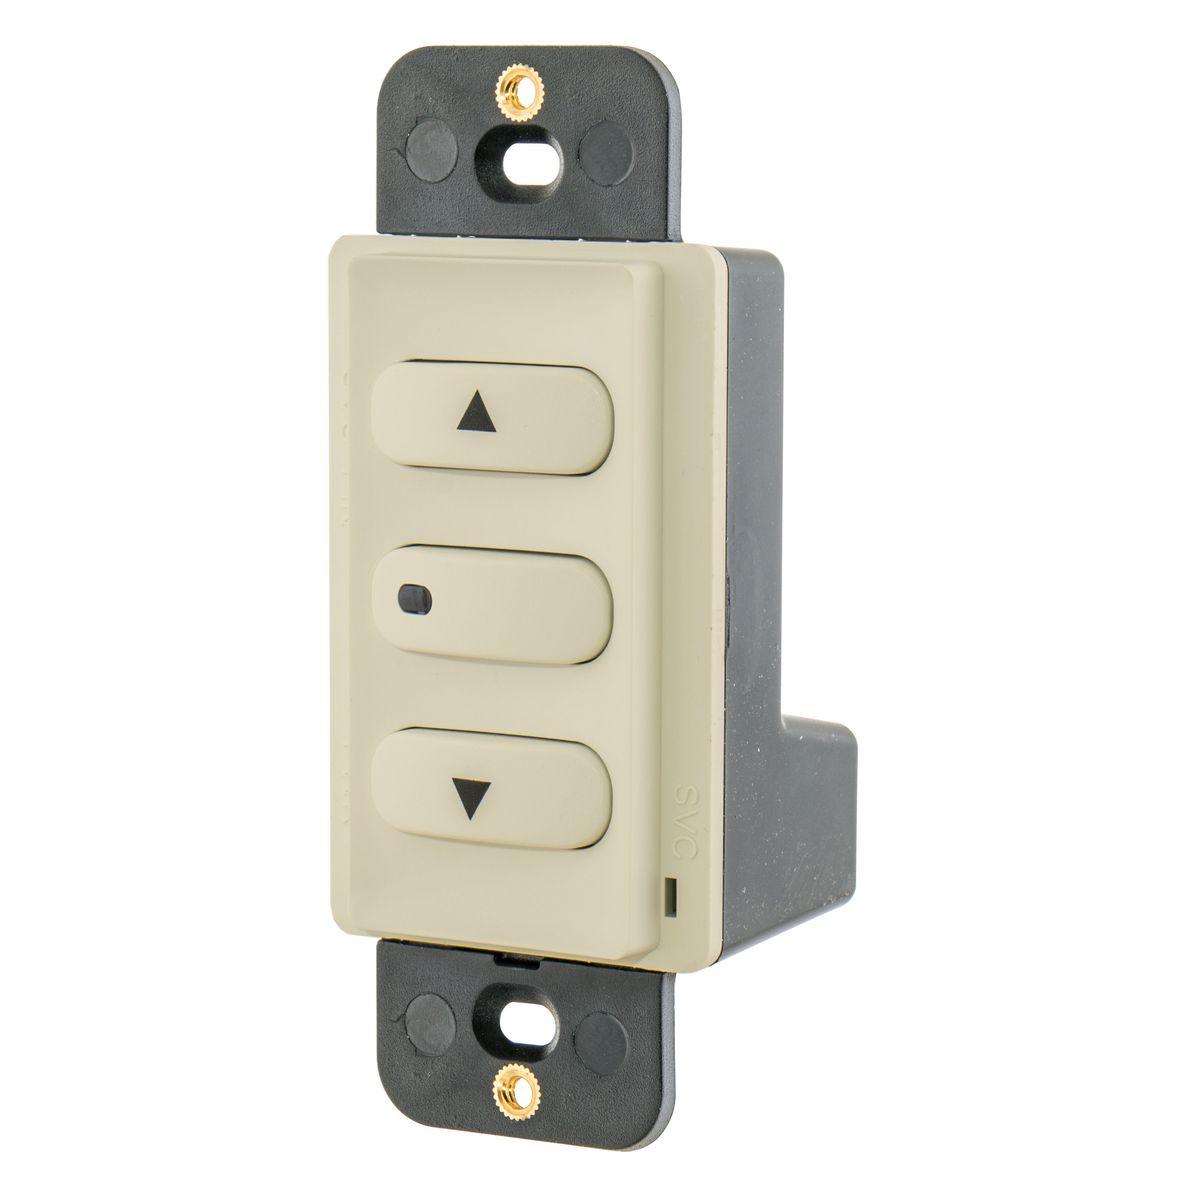 Hubbell DSL010I Switches and Lighting Control, DimmingSwitch, Low Voltage, Latching, 0-10V DC, Ivory 